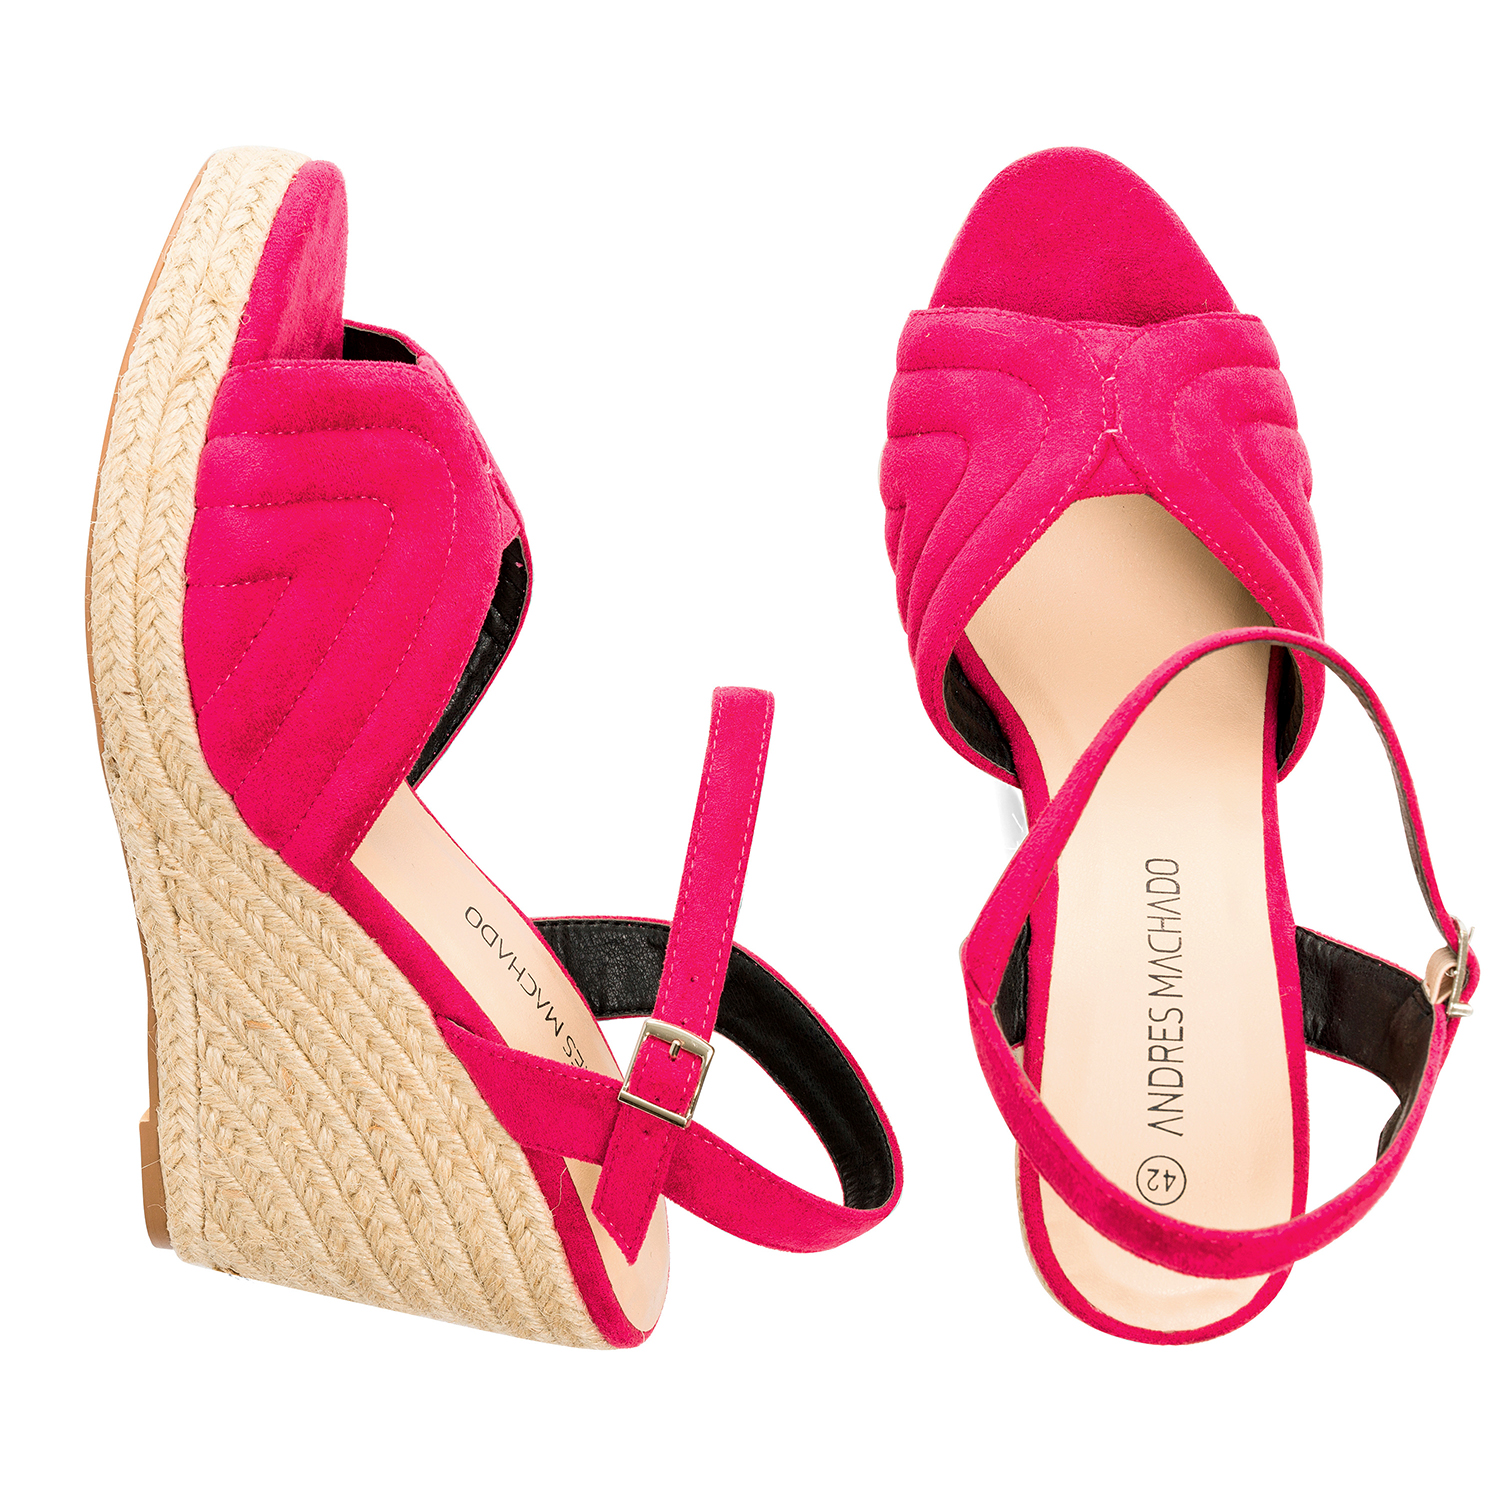 Fuchsia faux suede espadrilles with jute wedge 